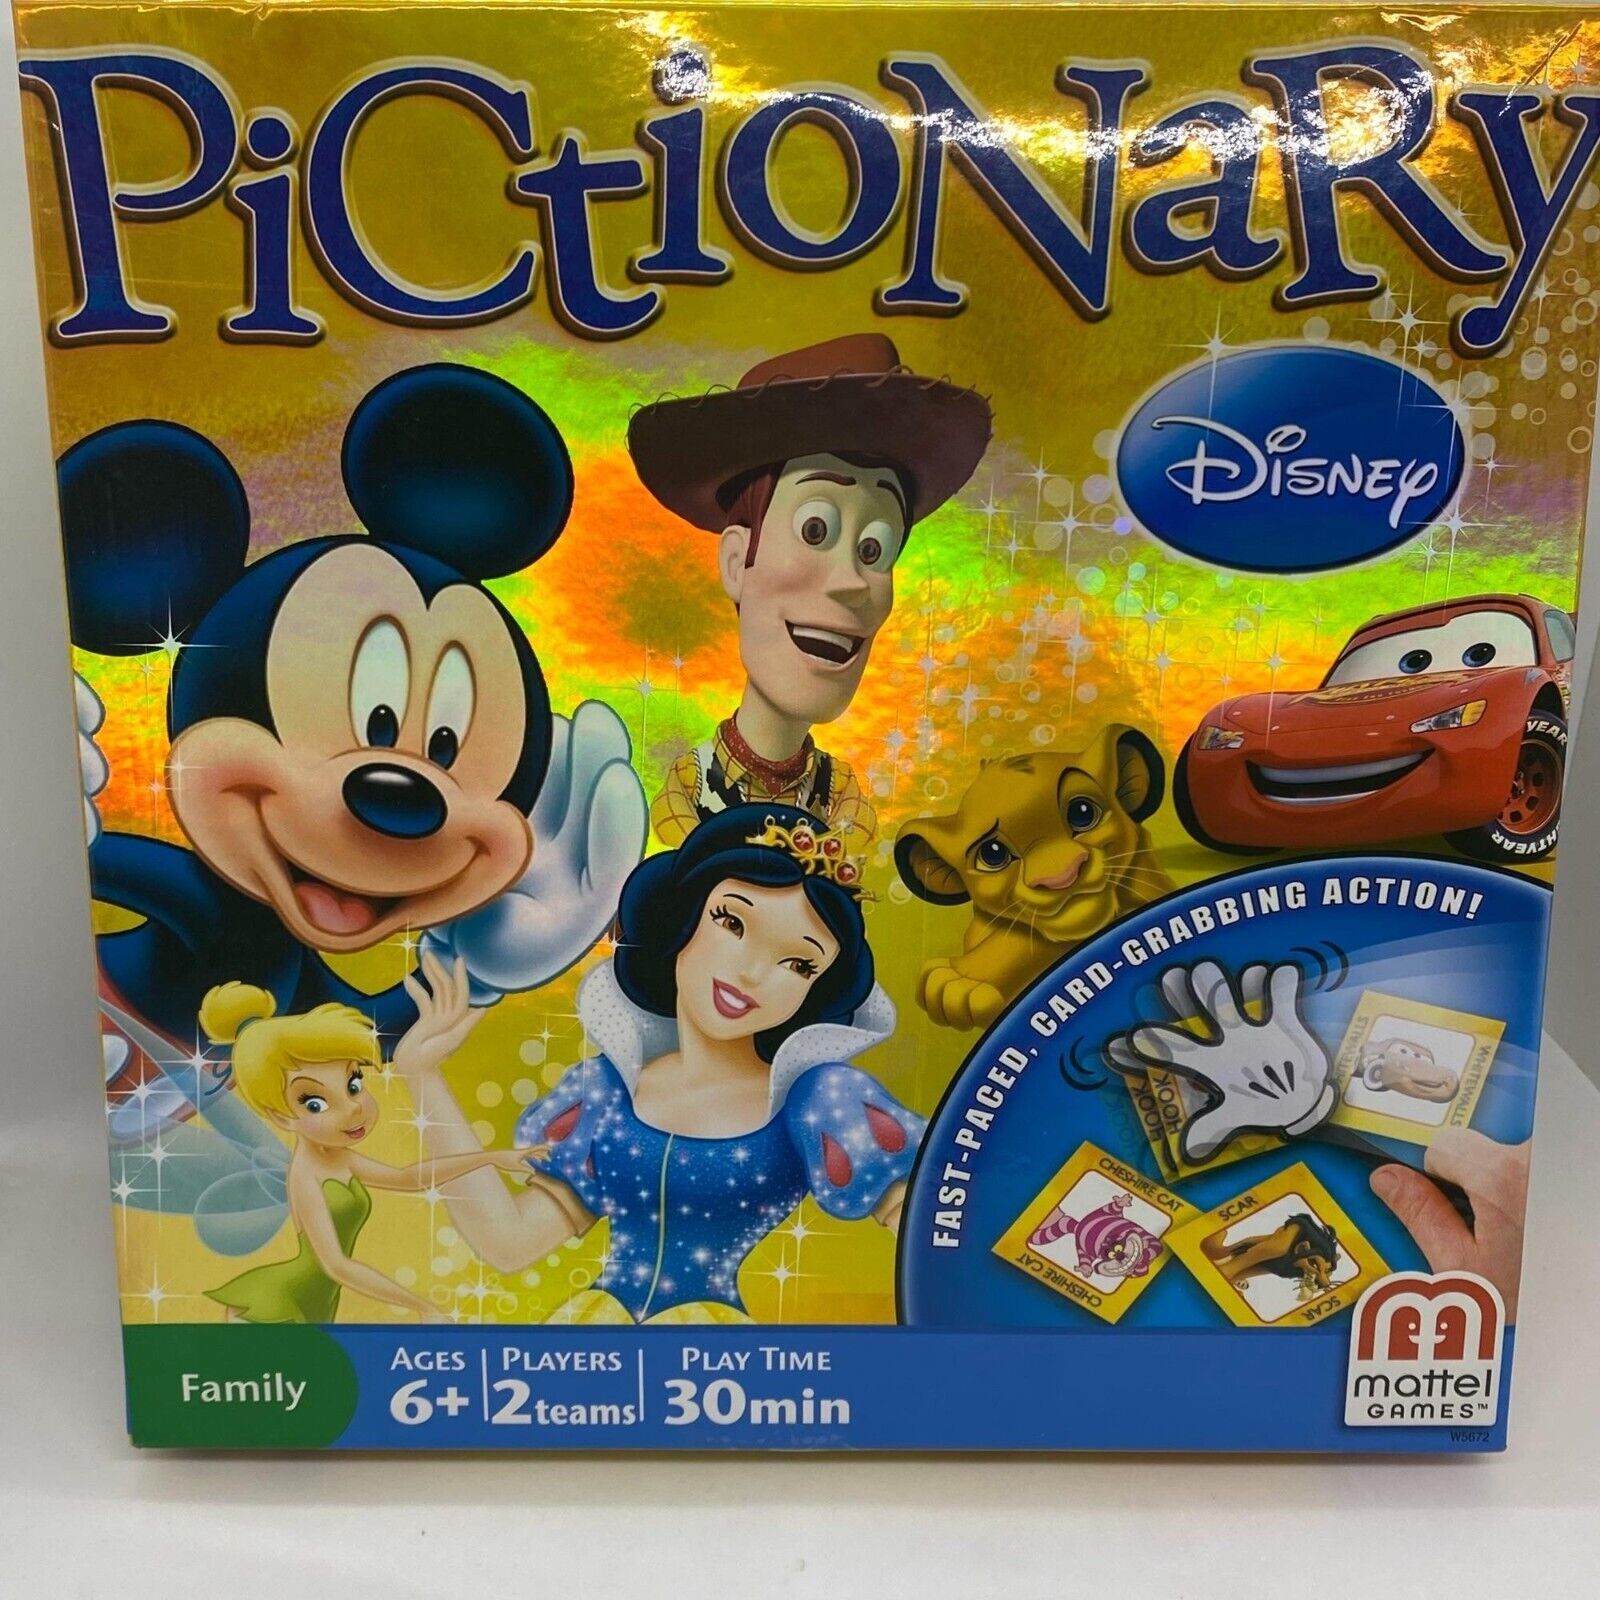 Primary image for Disney Pictionary Family Board Game by Mattel